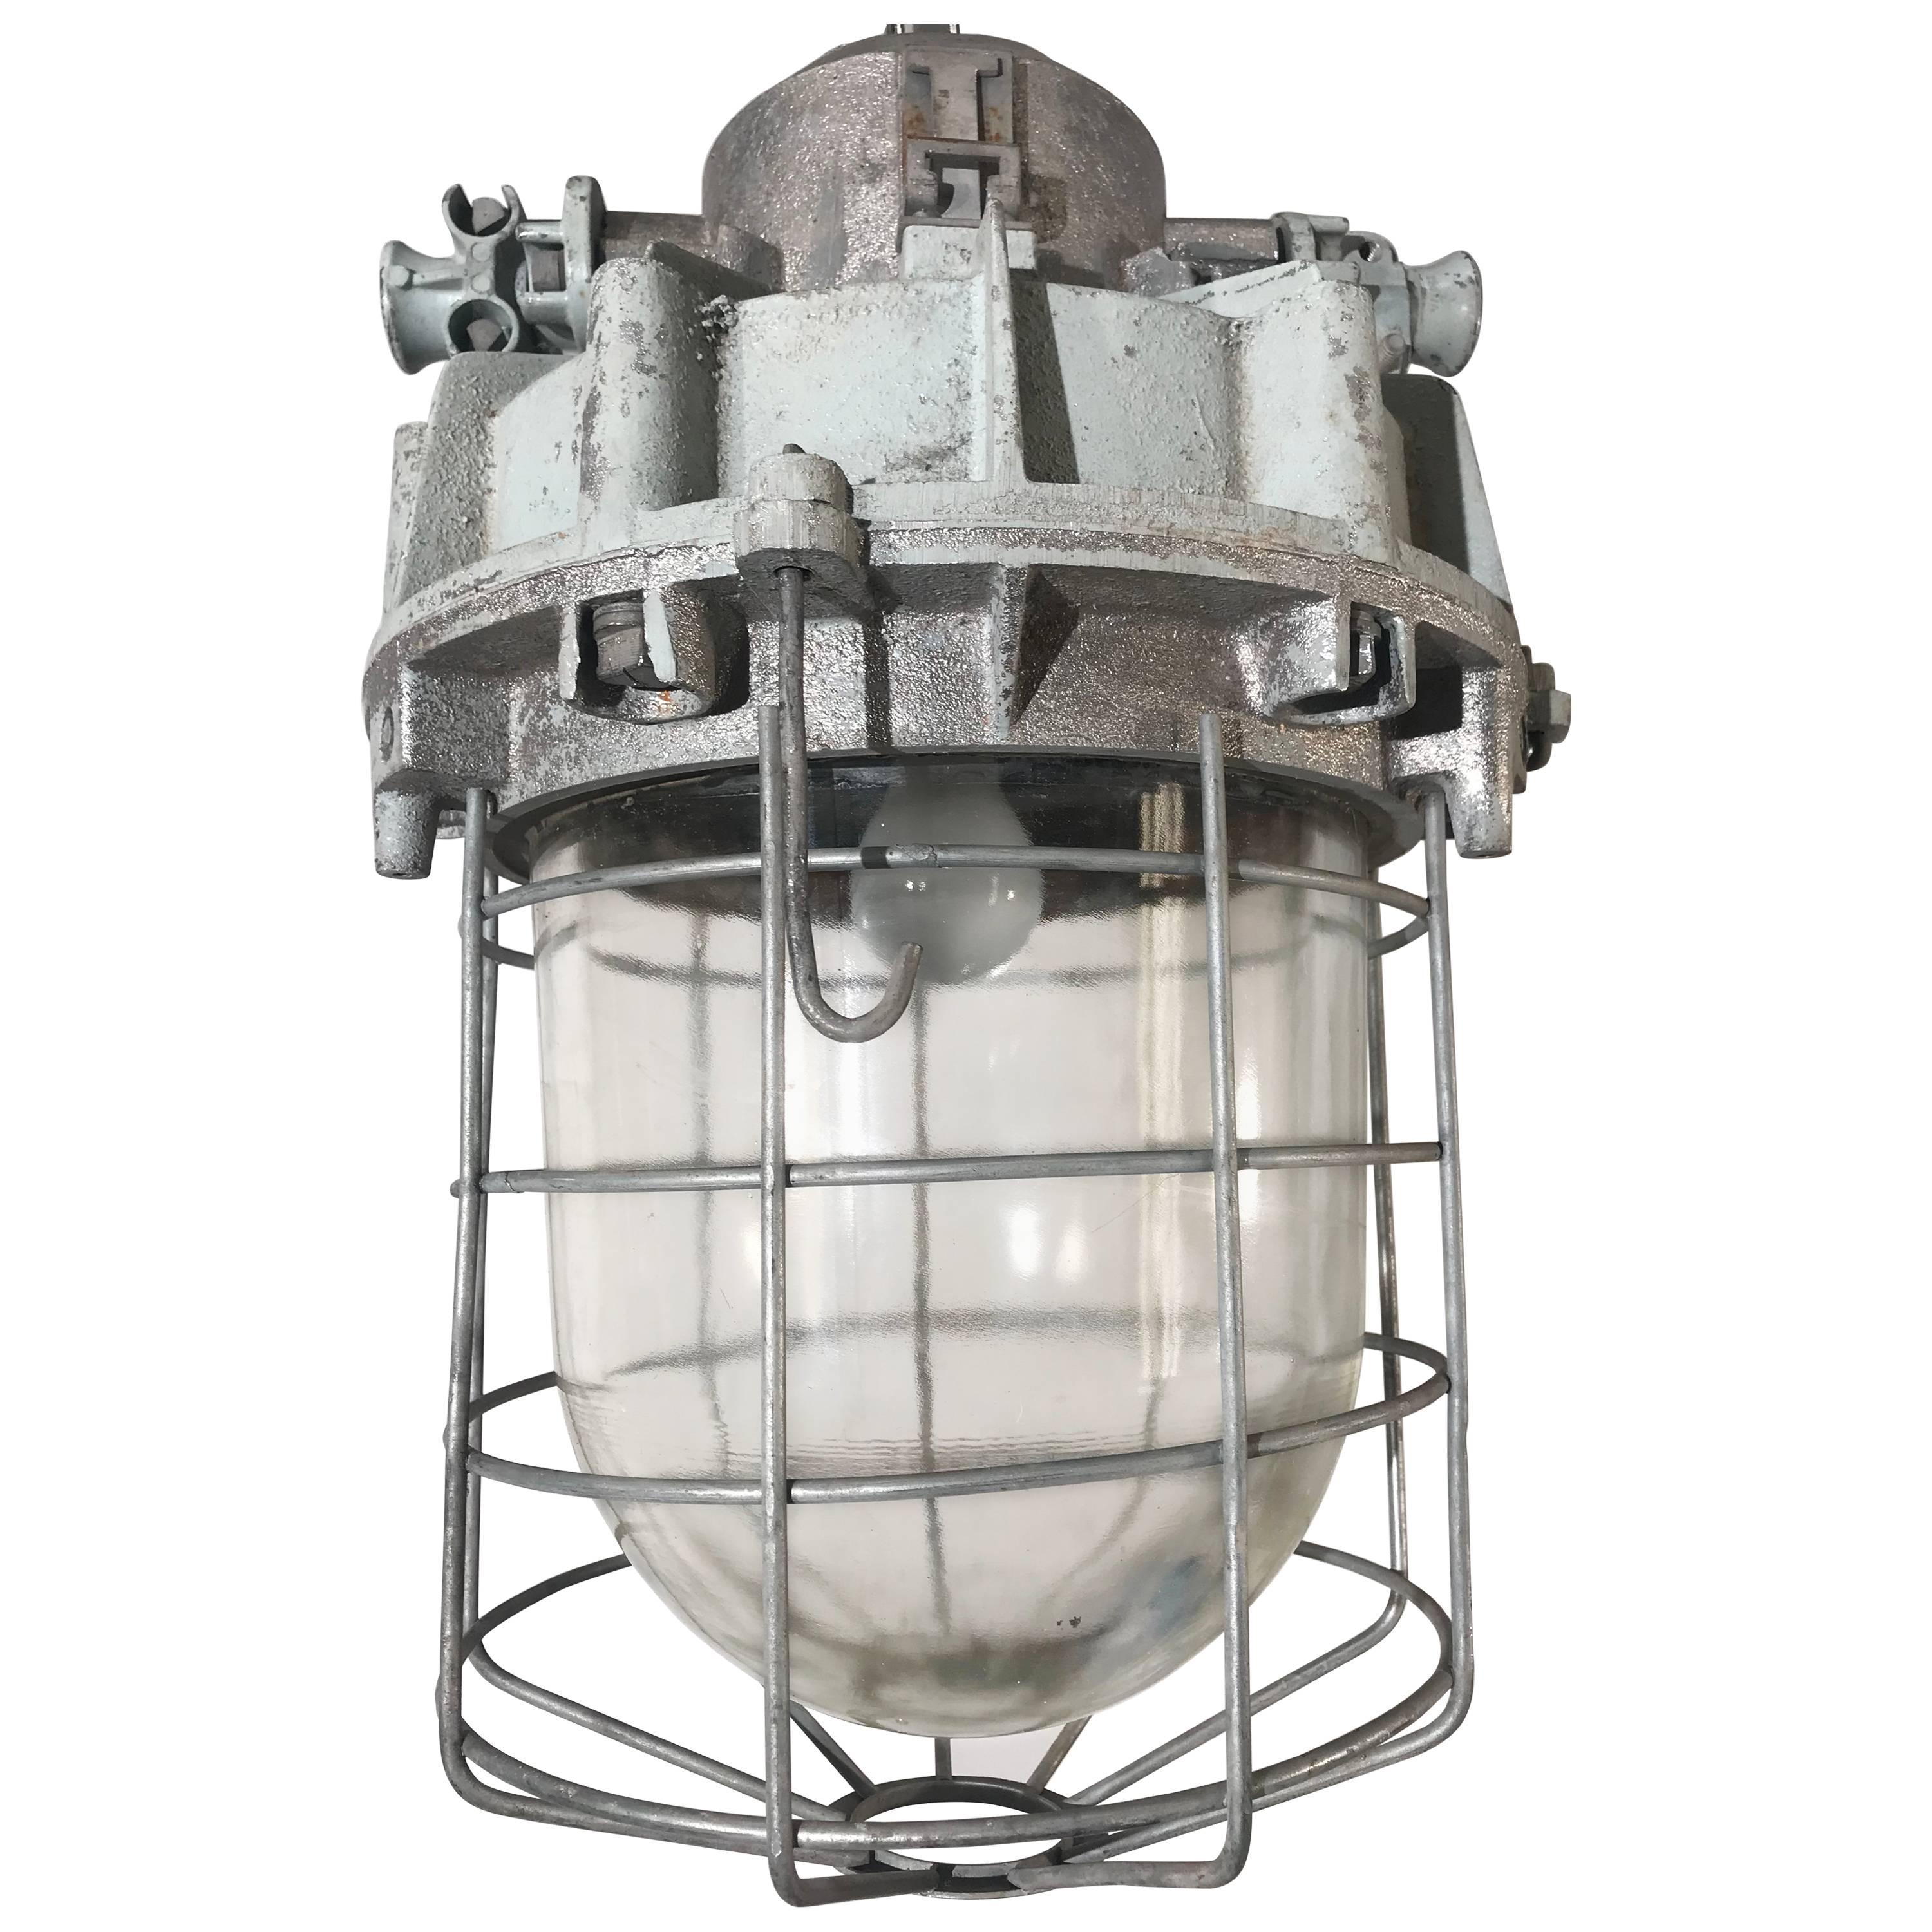 Large and Decorative 1920s Industrial Iron and Glass Caged Pendant/Light Fixture